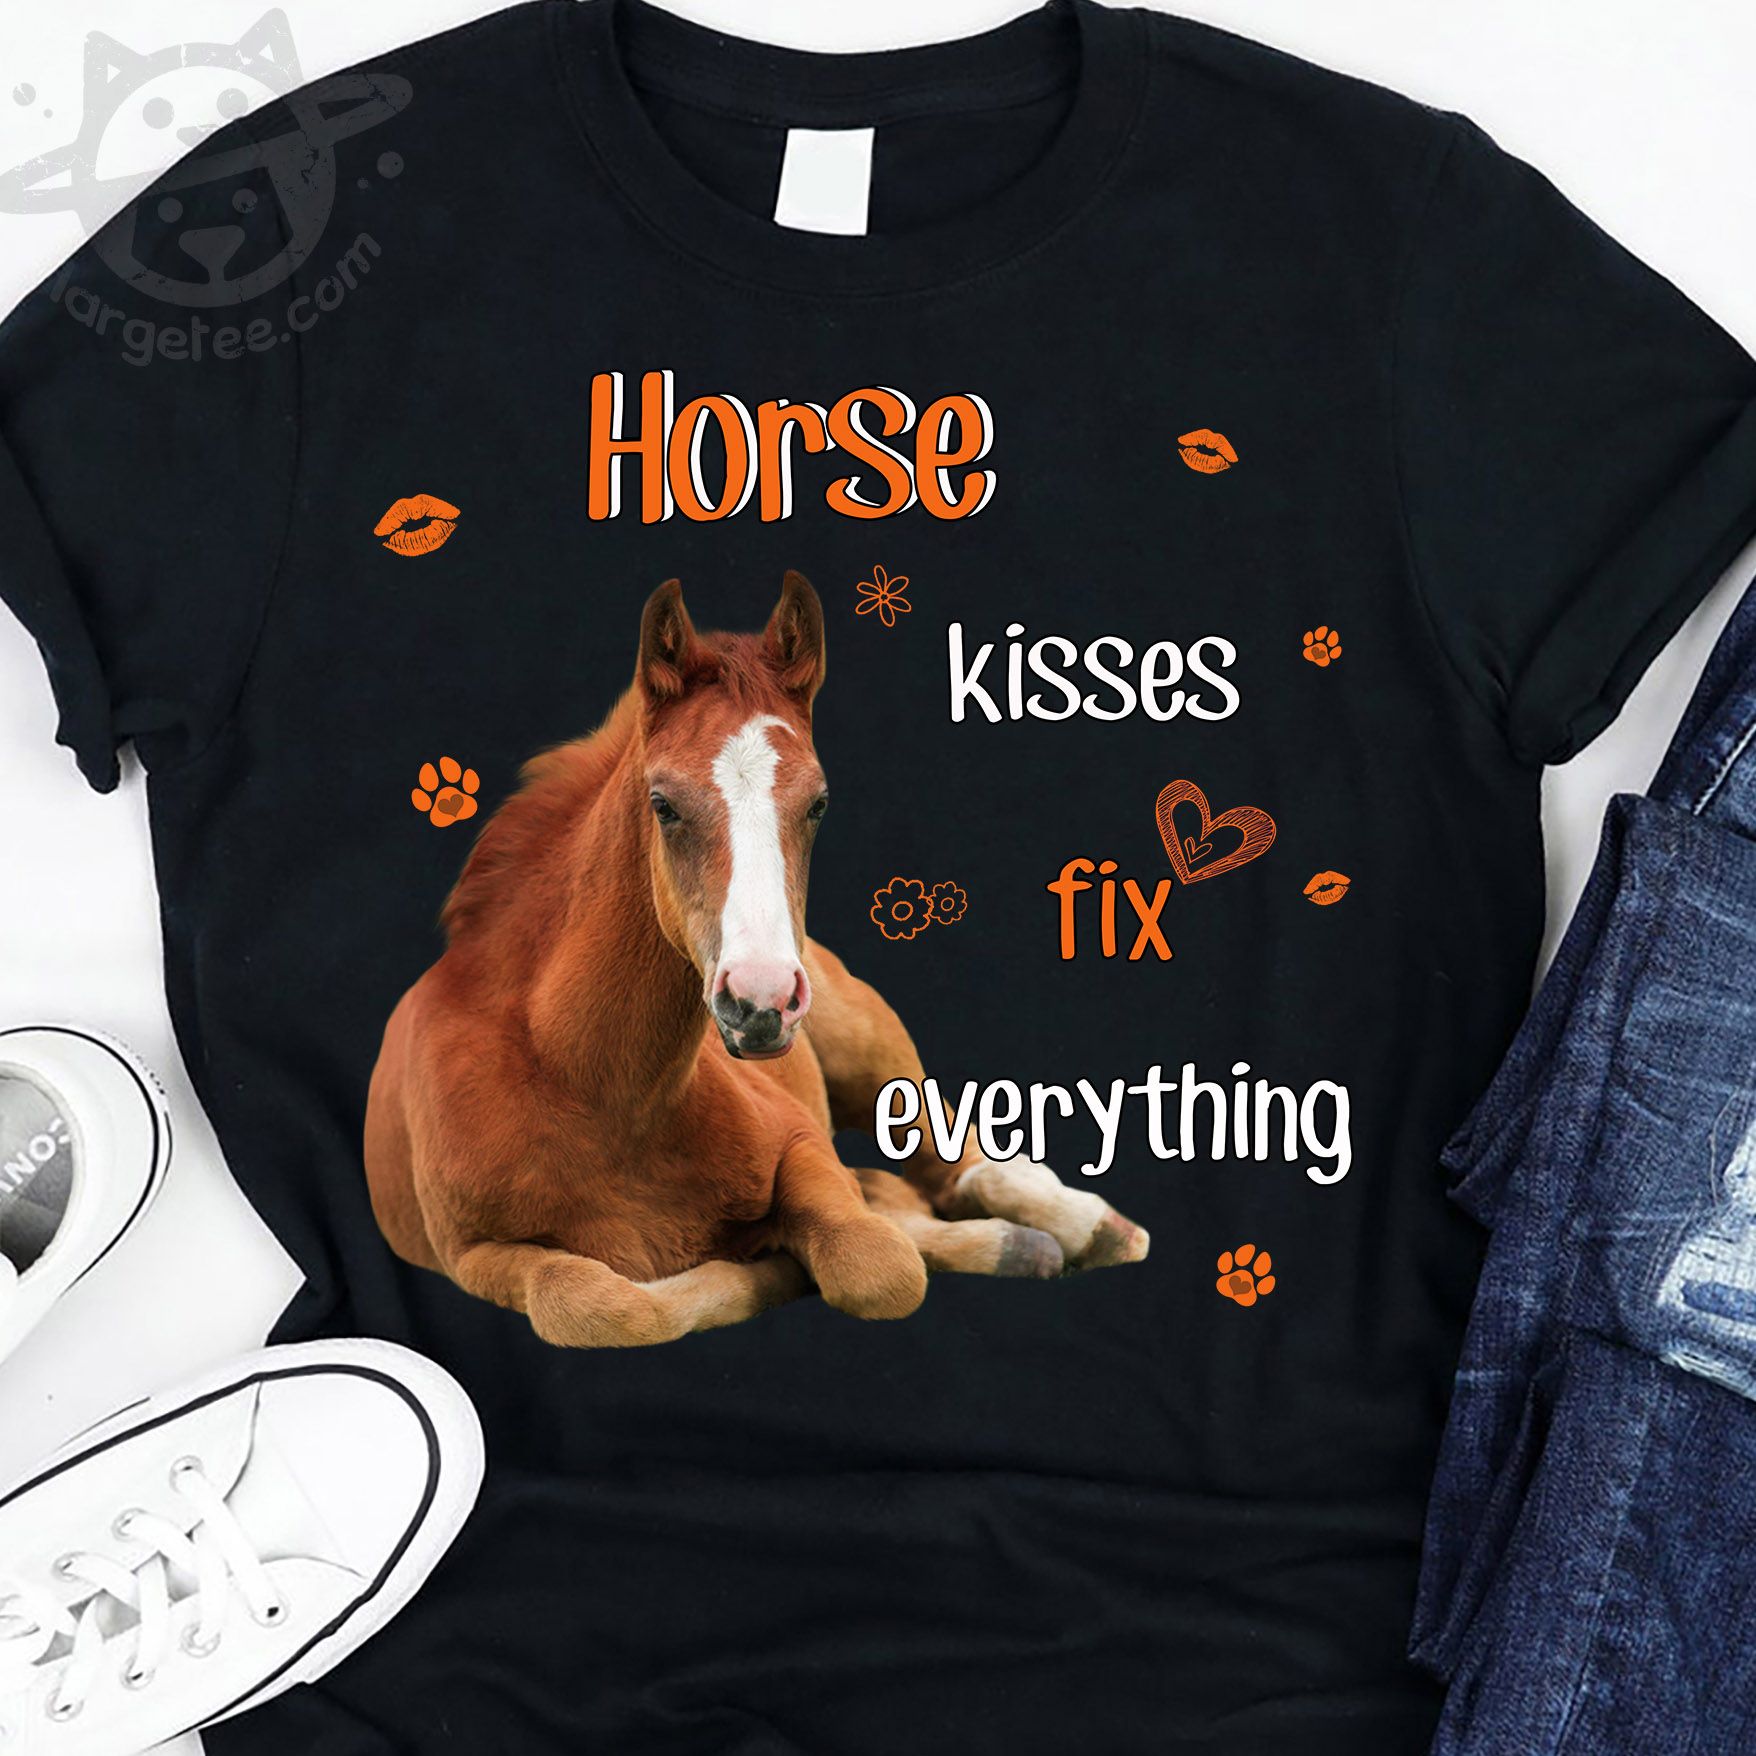 Horse kisses fix everything - Horse lover